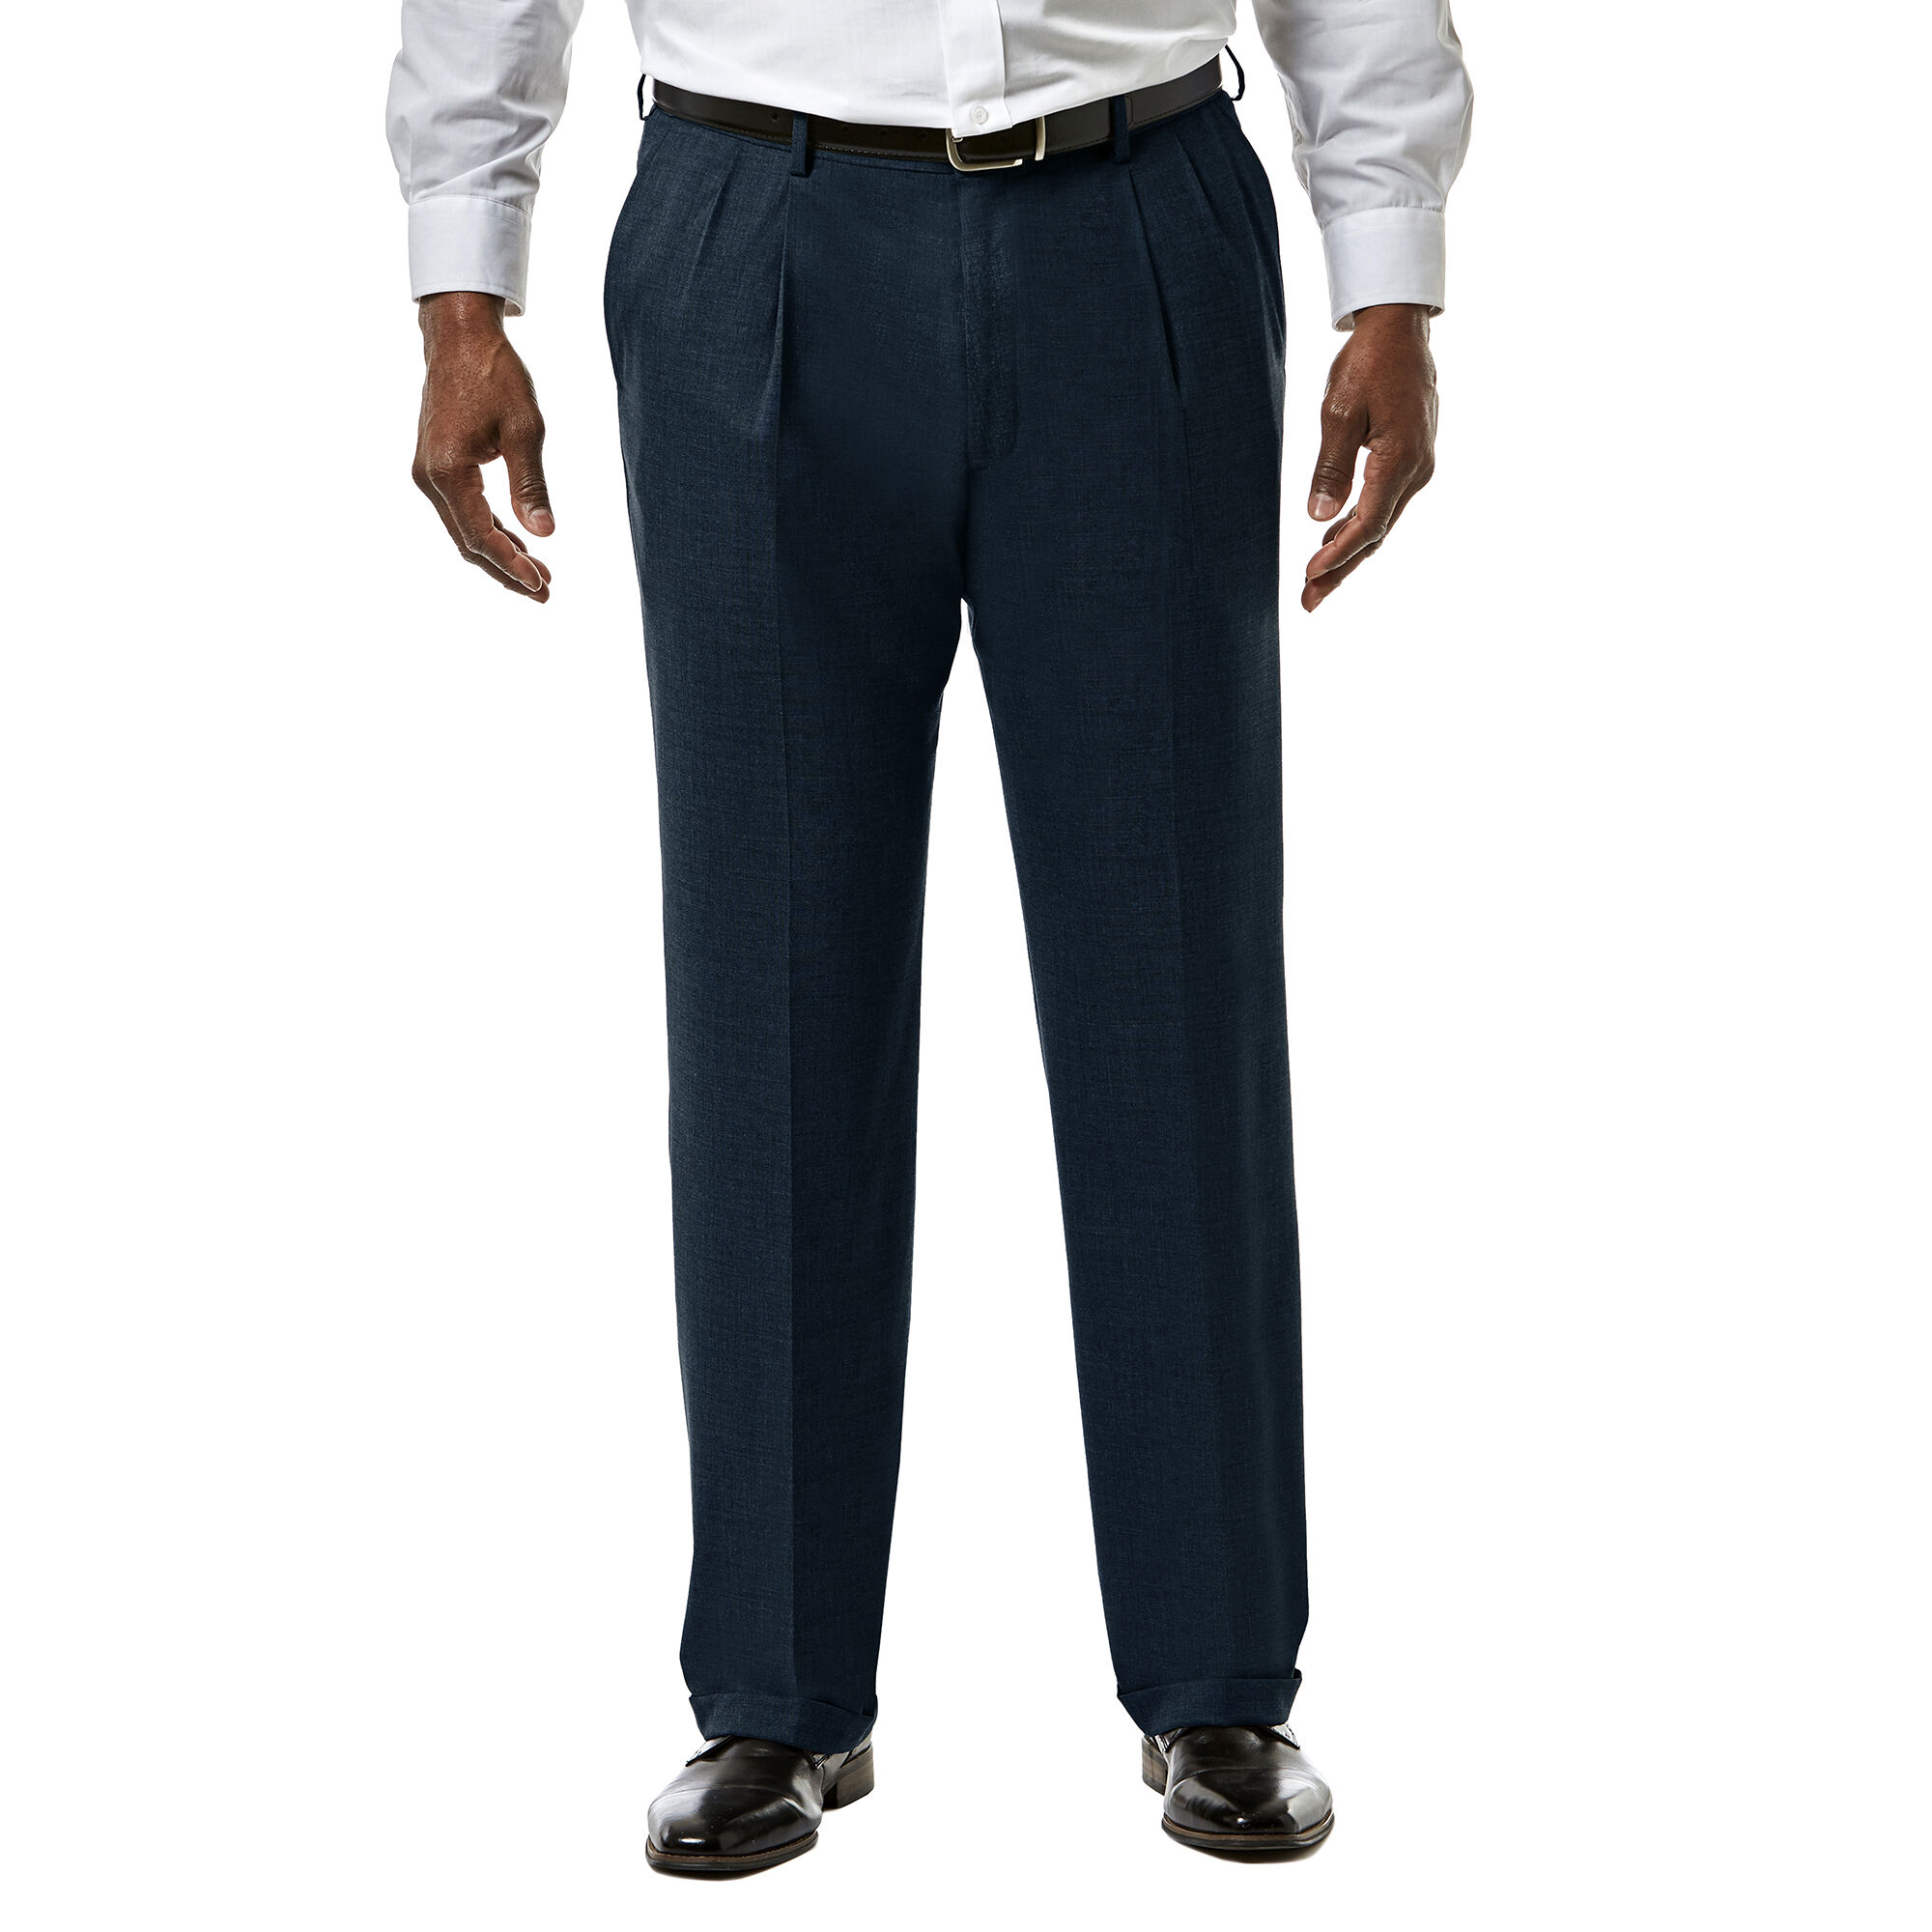 Big & Tall J.M. Haggar Premium Stretch Suit Pant - Pleated Front Dark Navy Big & Tall Classic Fit Pleated Front Hidden Expandable Waistband: Expands up to 3" 64% Polyester, 34% Viscoe Rayon 2% Spandex Dry Clean Only Imported Style #: HY91182 Size - XXL